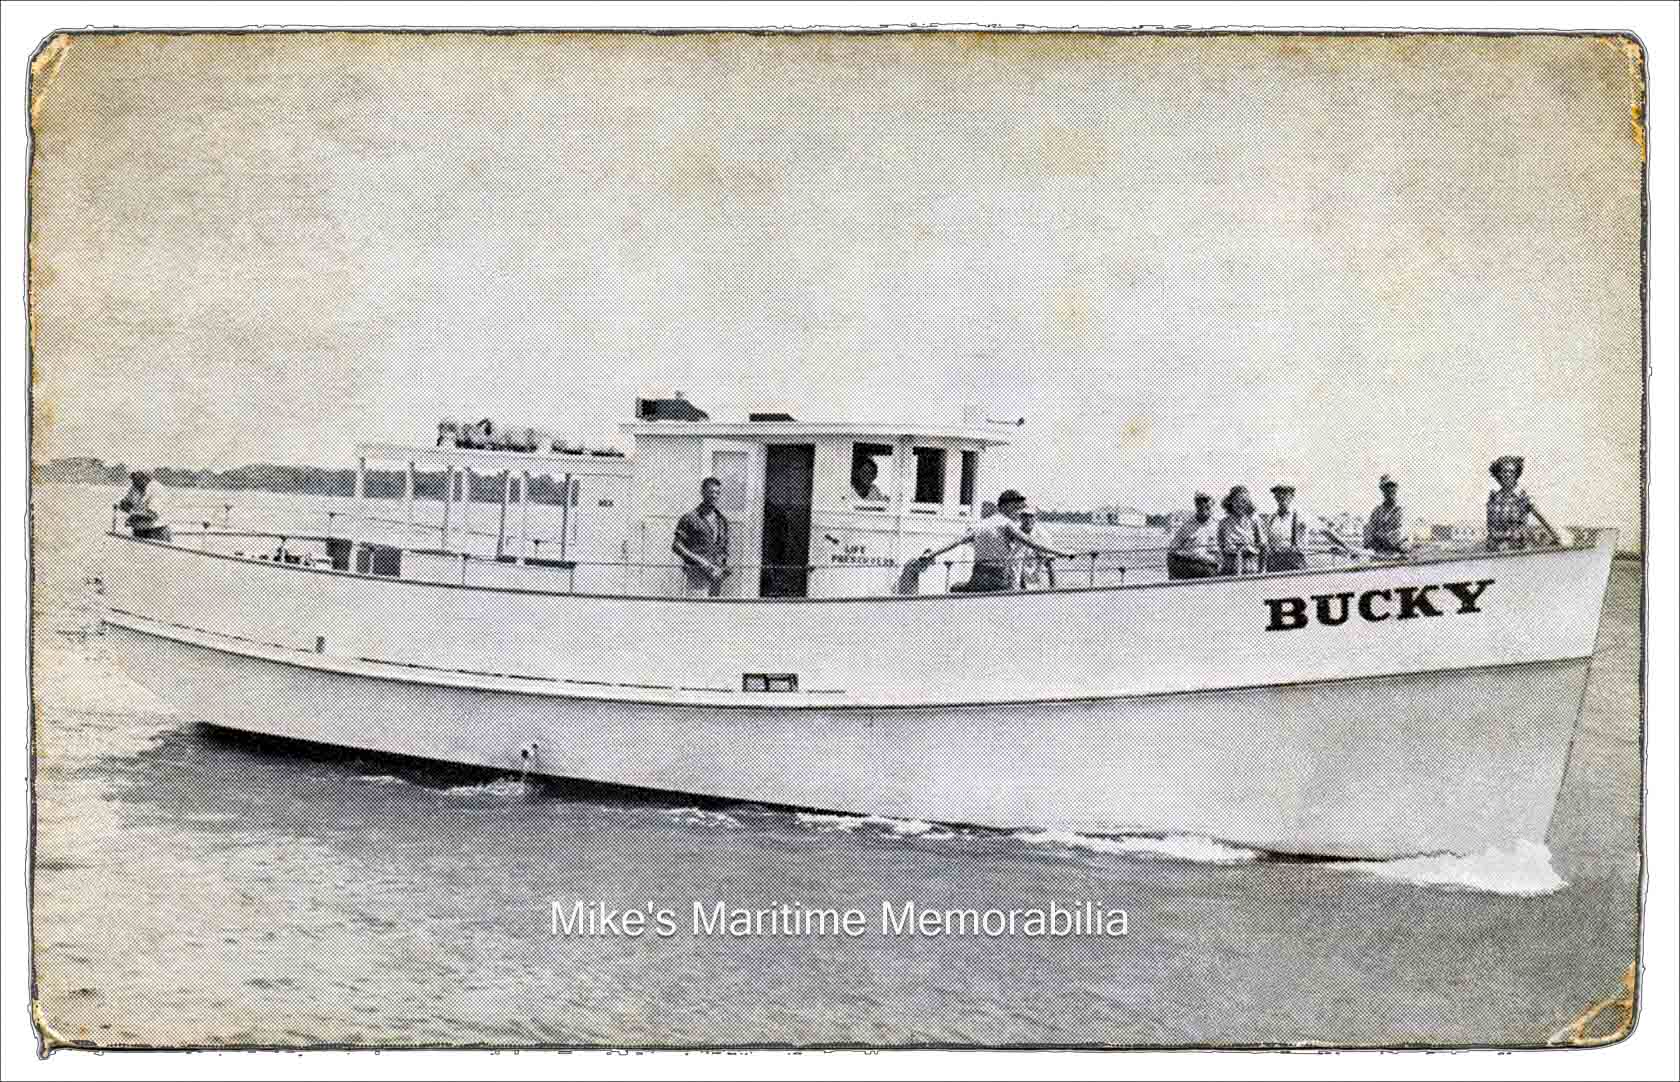 BUCKY, Cape May, NJ – 1948 The "BUCKY" was built in 1948 by F. W. Smith Boatyard at Bena, VA for Captain Lavallette Buck and originally sailed from Cape May, NJ. Captain Michael Buban later purchased the "BUCKY" and relocated the boat to Bayonne, NJ and then to Elizabeth, NJ and sailed her from there until 1997. She last sailed on Lake Champlain as the excursion vessel "PHILOMENA D" from Westport, NY until she was dropped from documentation in 2005.